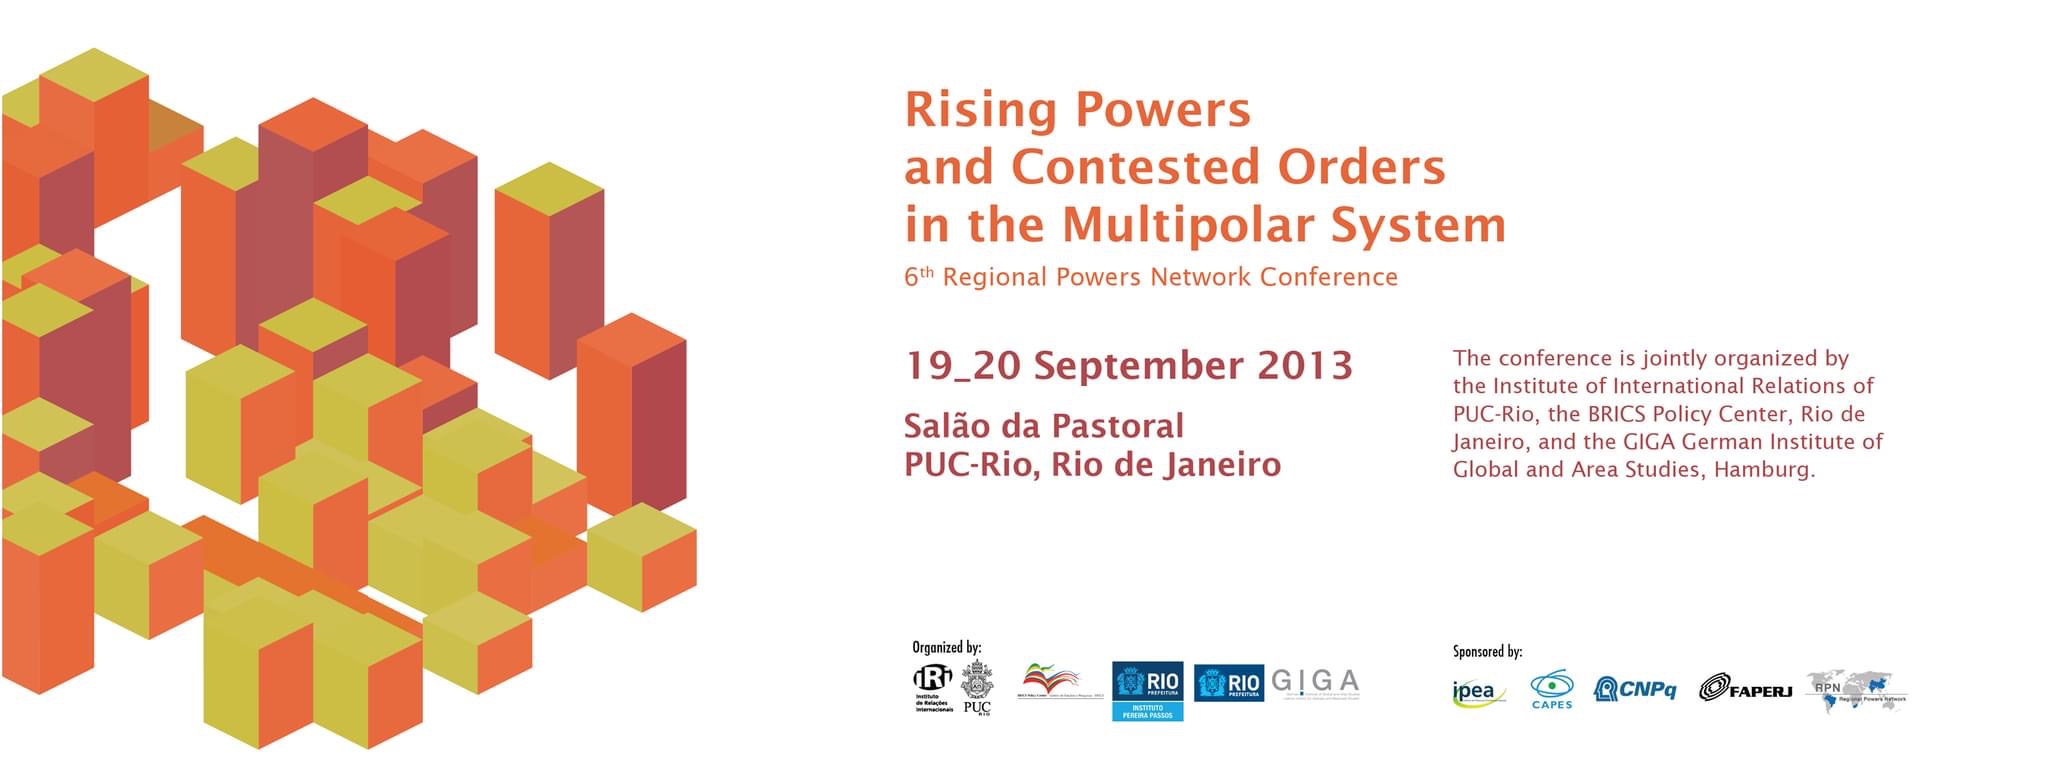 Rising Powers and Contested Orders in the Multipolar System